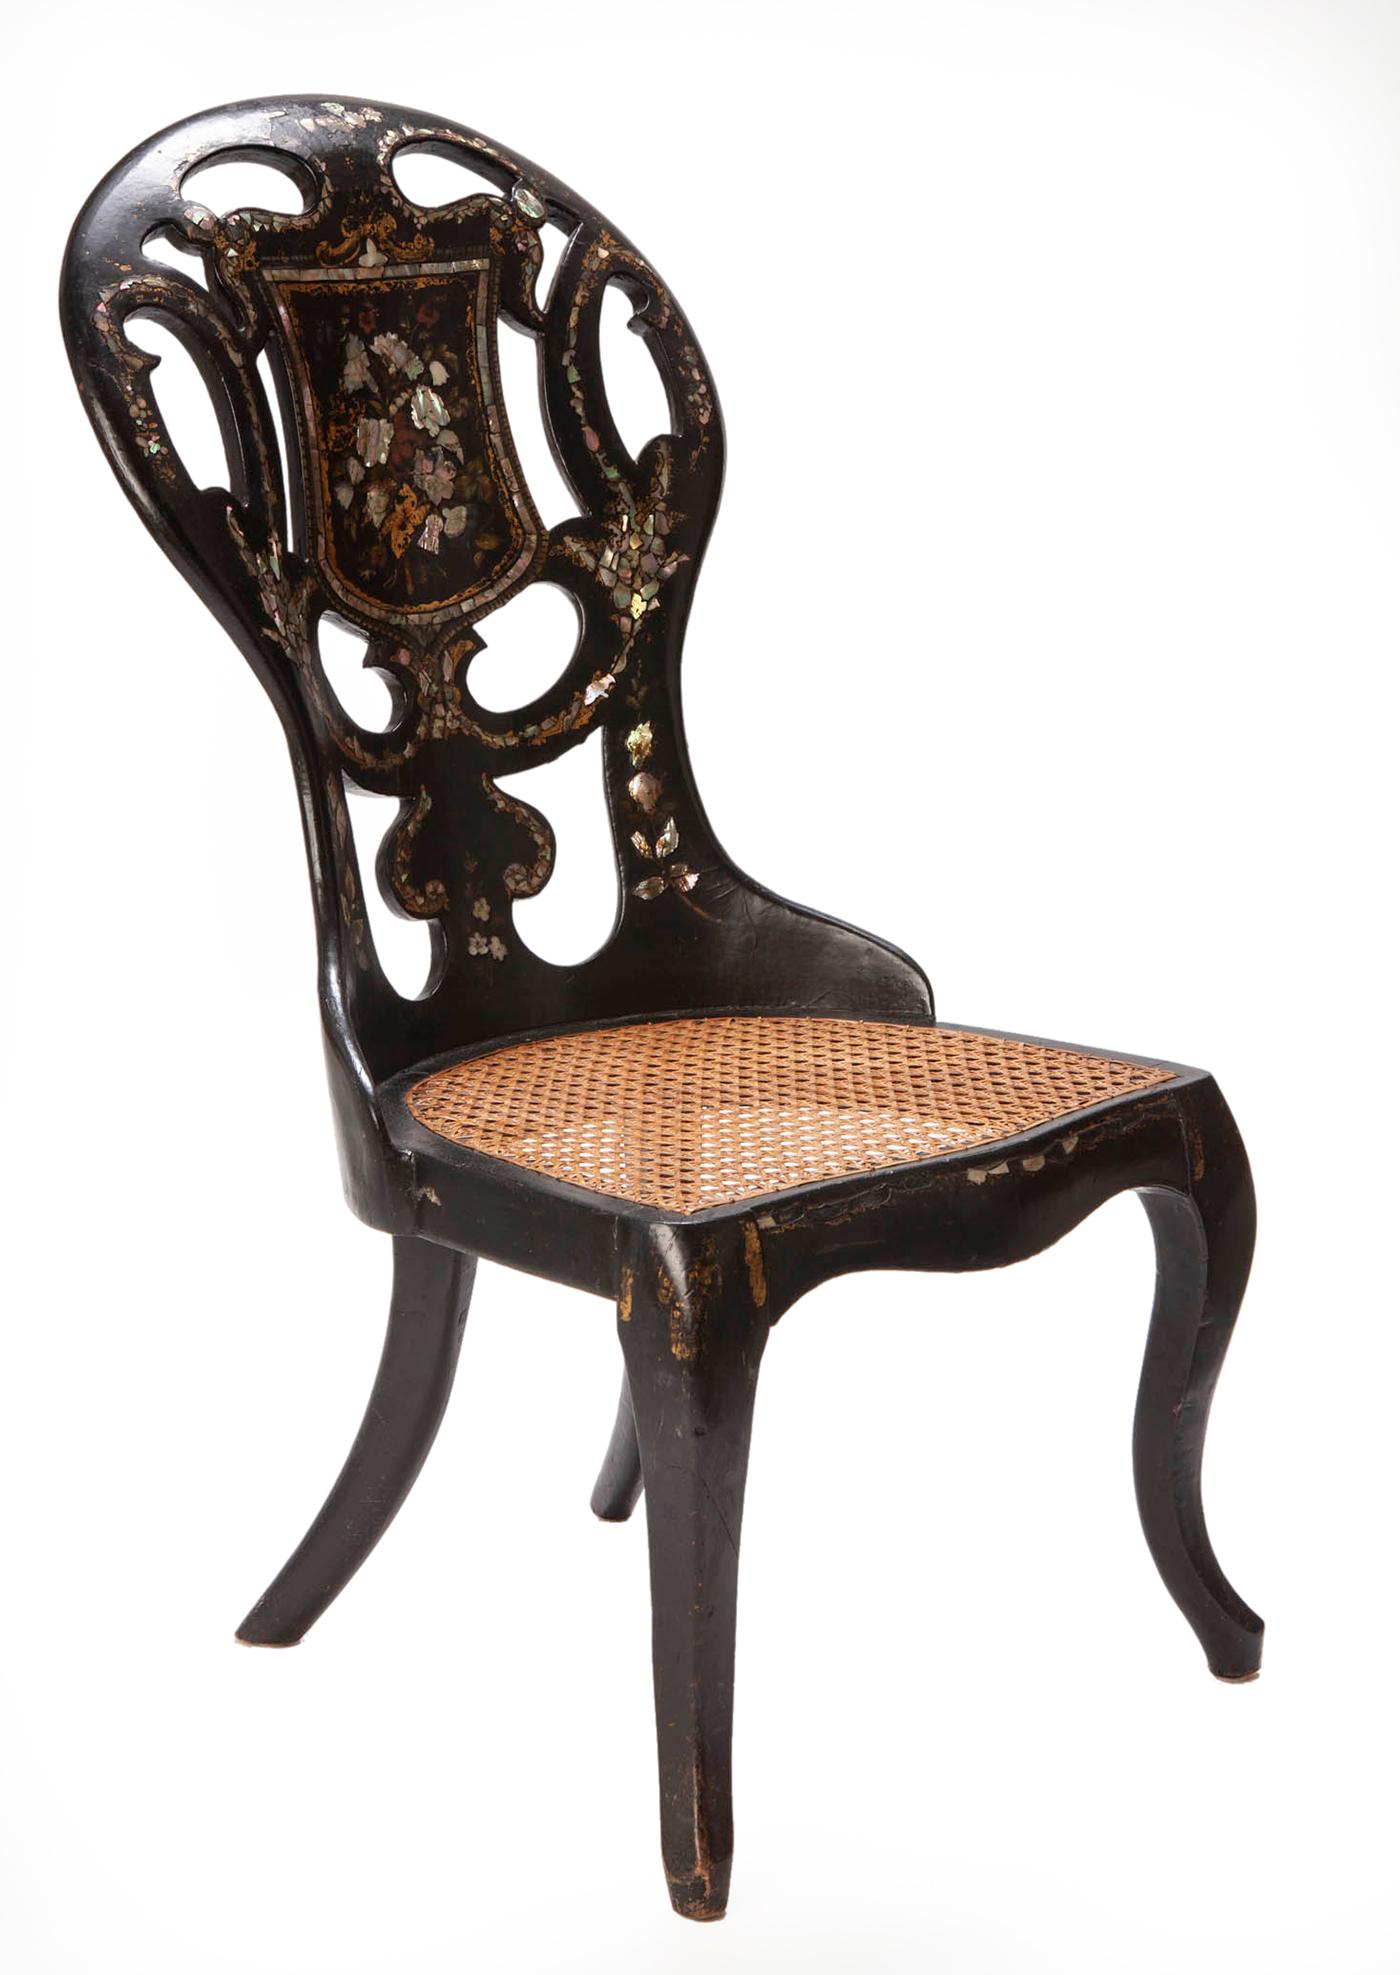 Hand-Crafted 19th Century English Papier Mâché Mother of Pearl Inlaid Chair